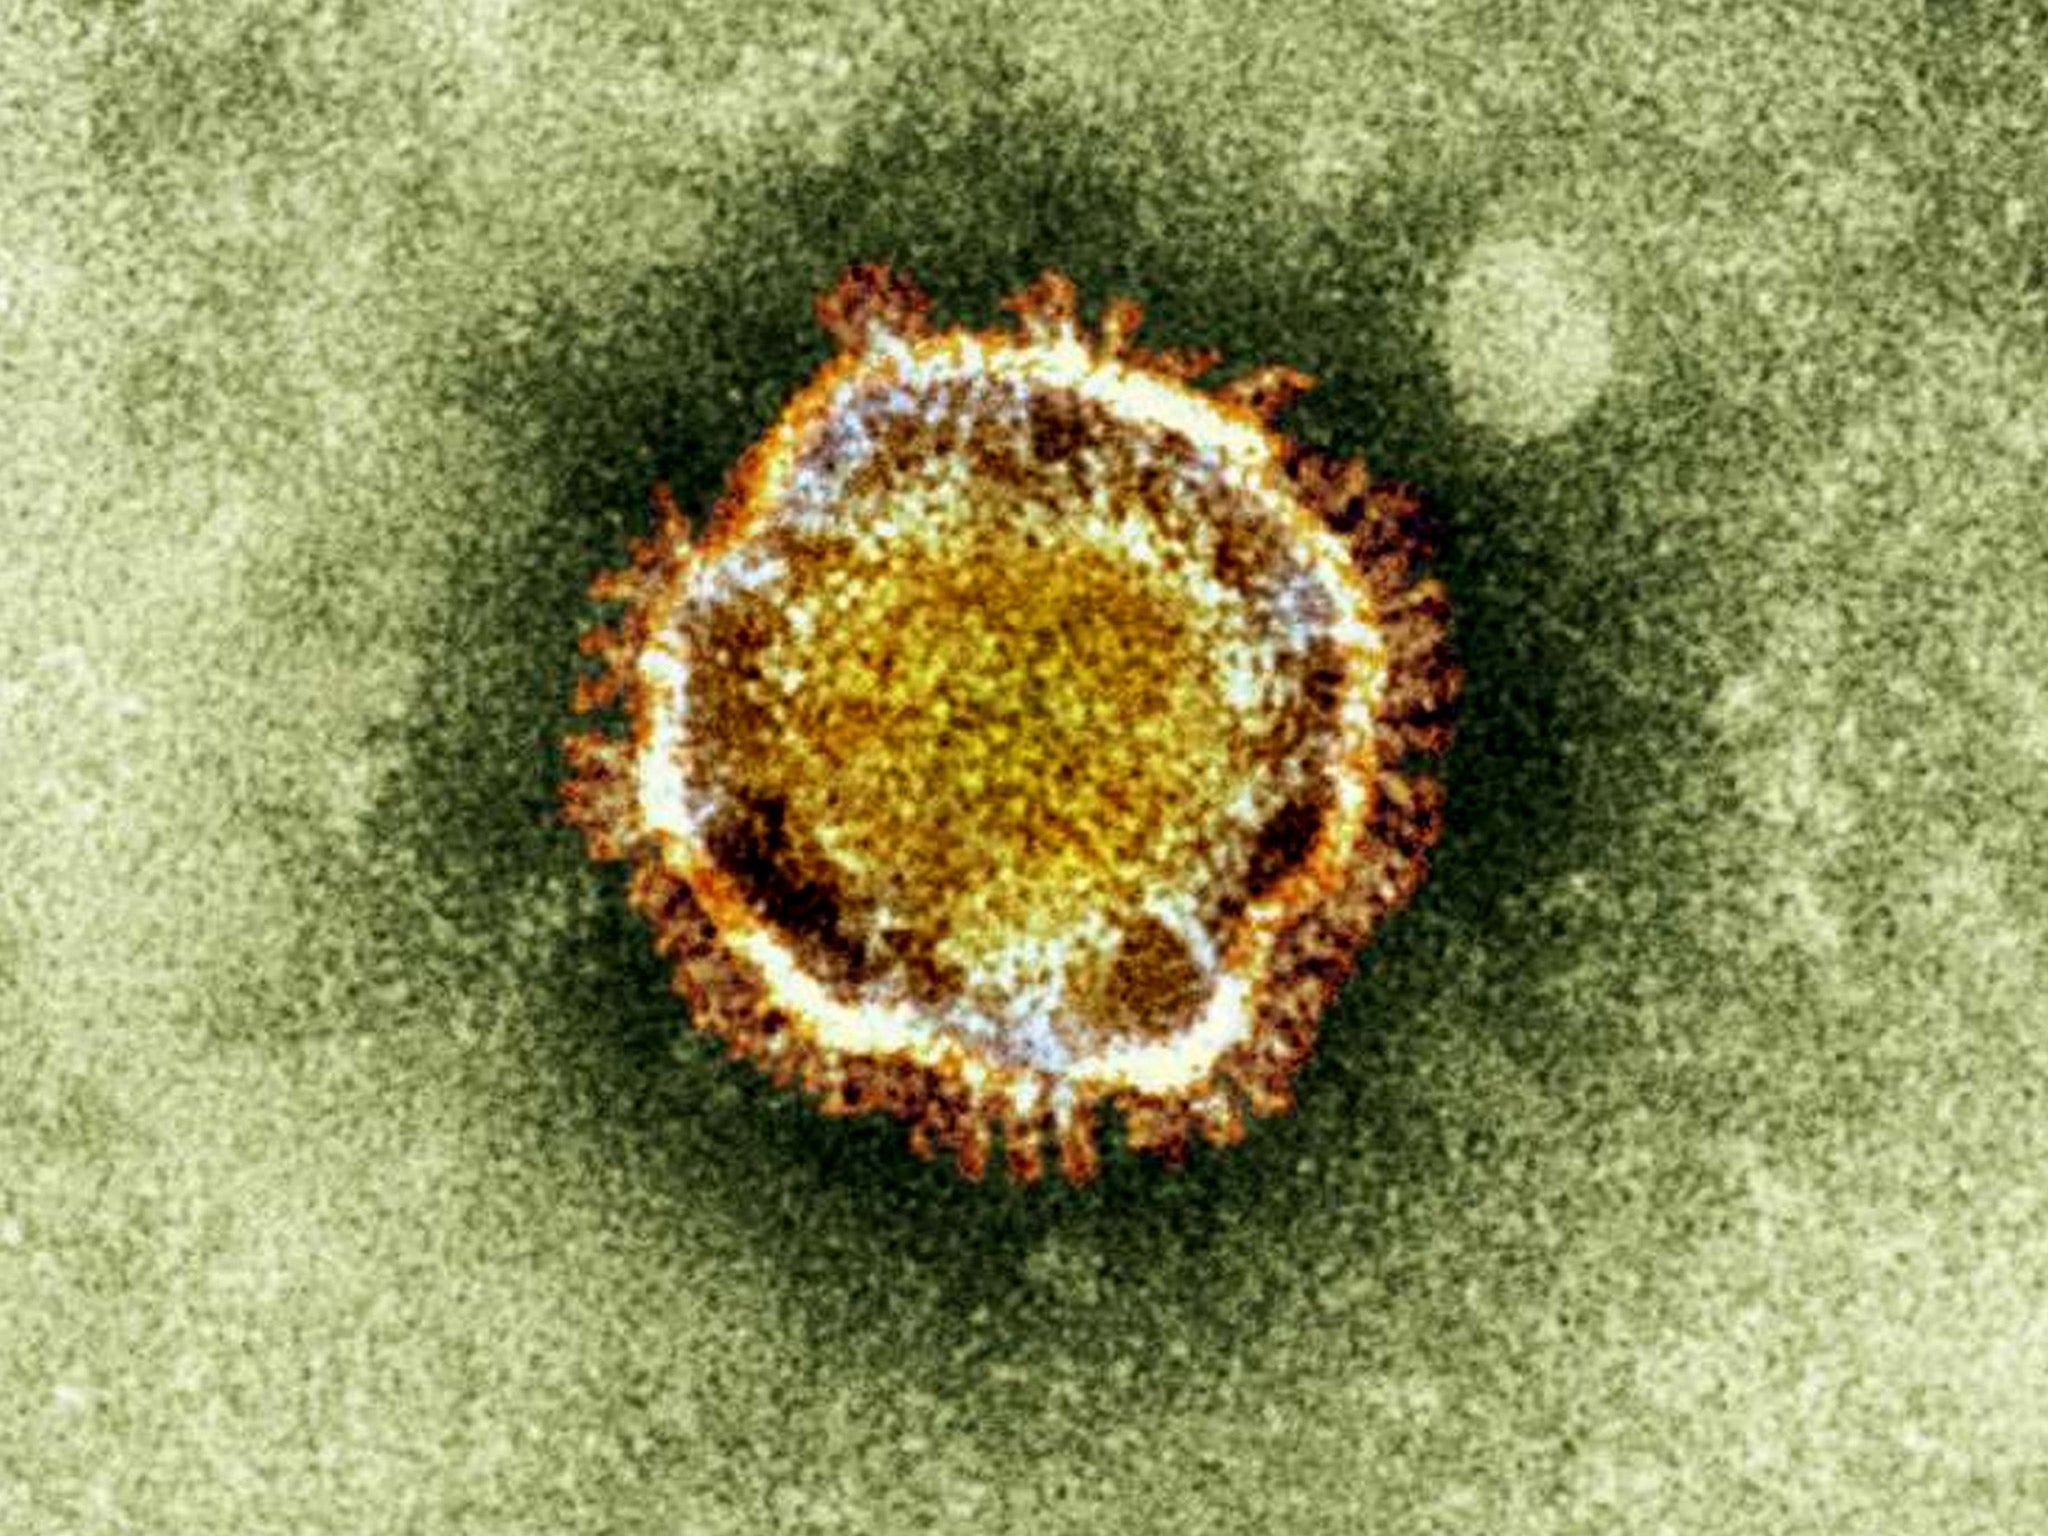 Coronavirus was the official cause of the Sars virus, which caused hundreds of deaths in 2003, said the WHO